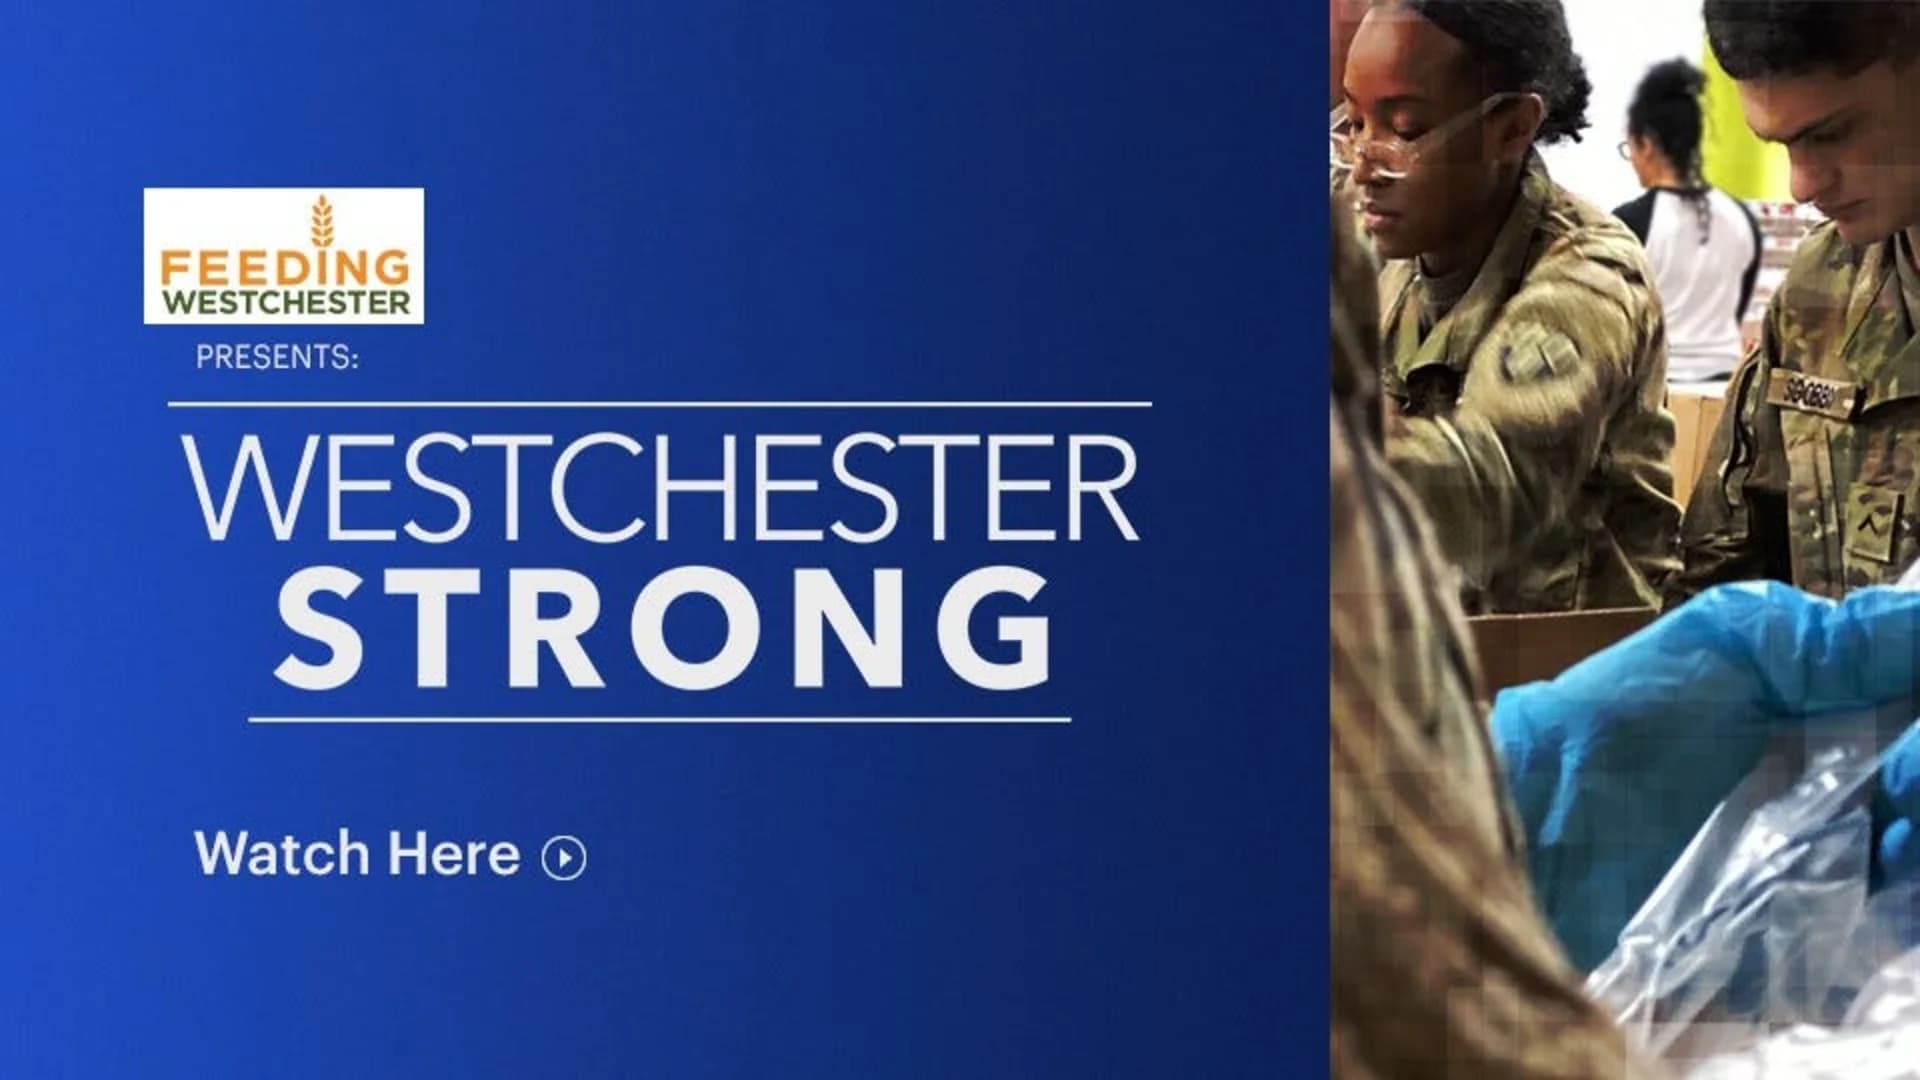 Westchester Strong Text-a-Thon - sponsored by Feeding Westchester